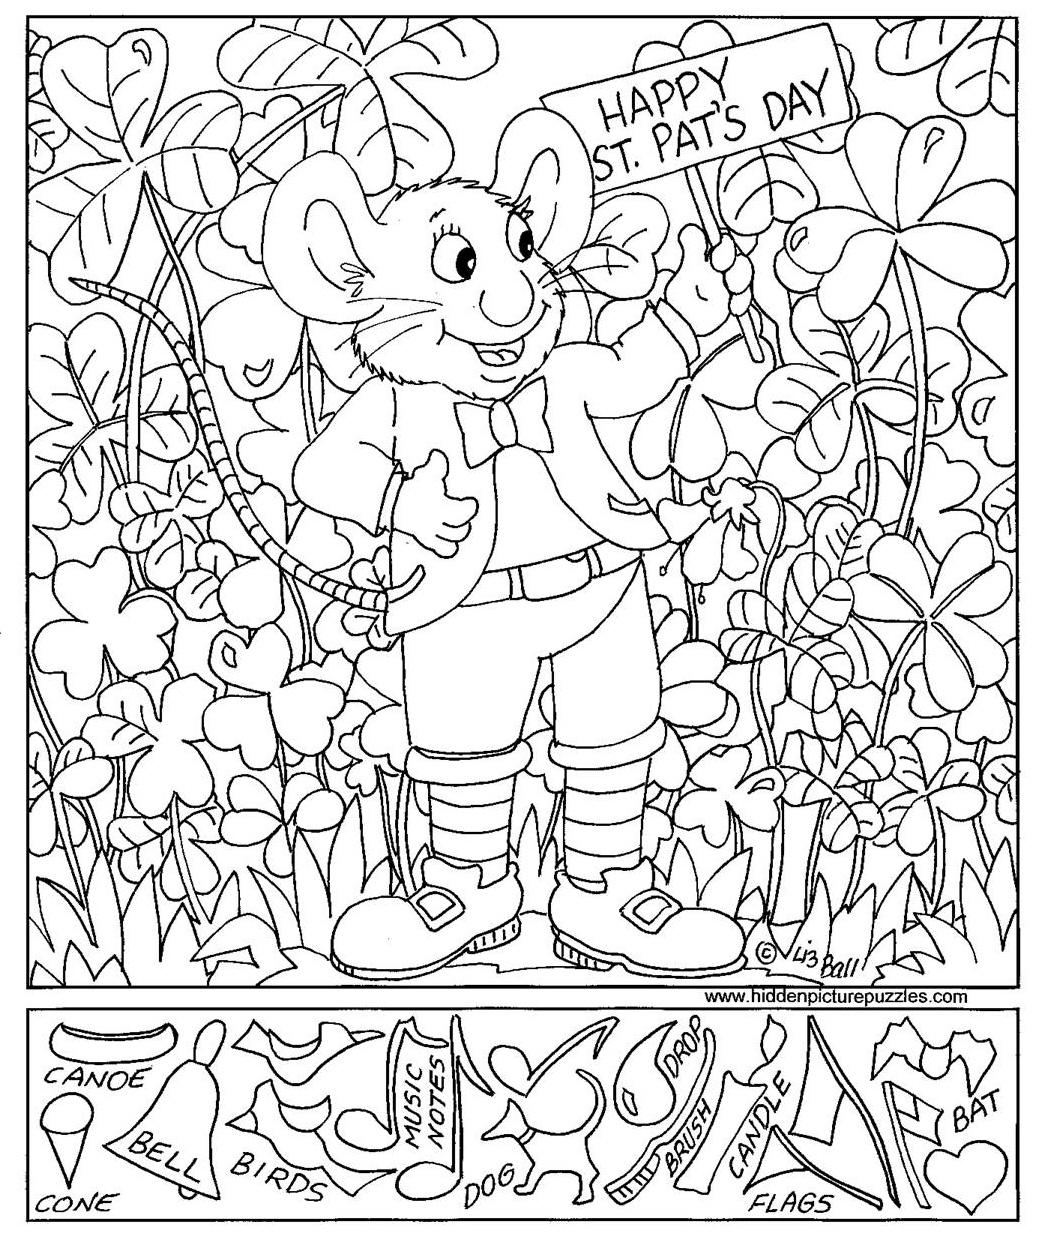 object search coloring pages and find objects - photo #12